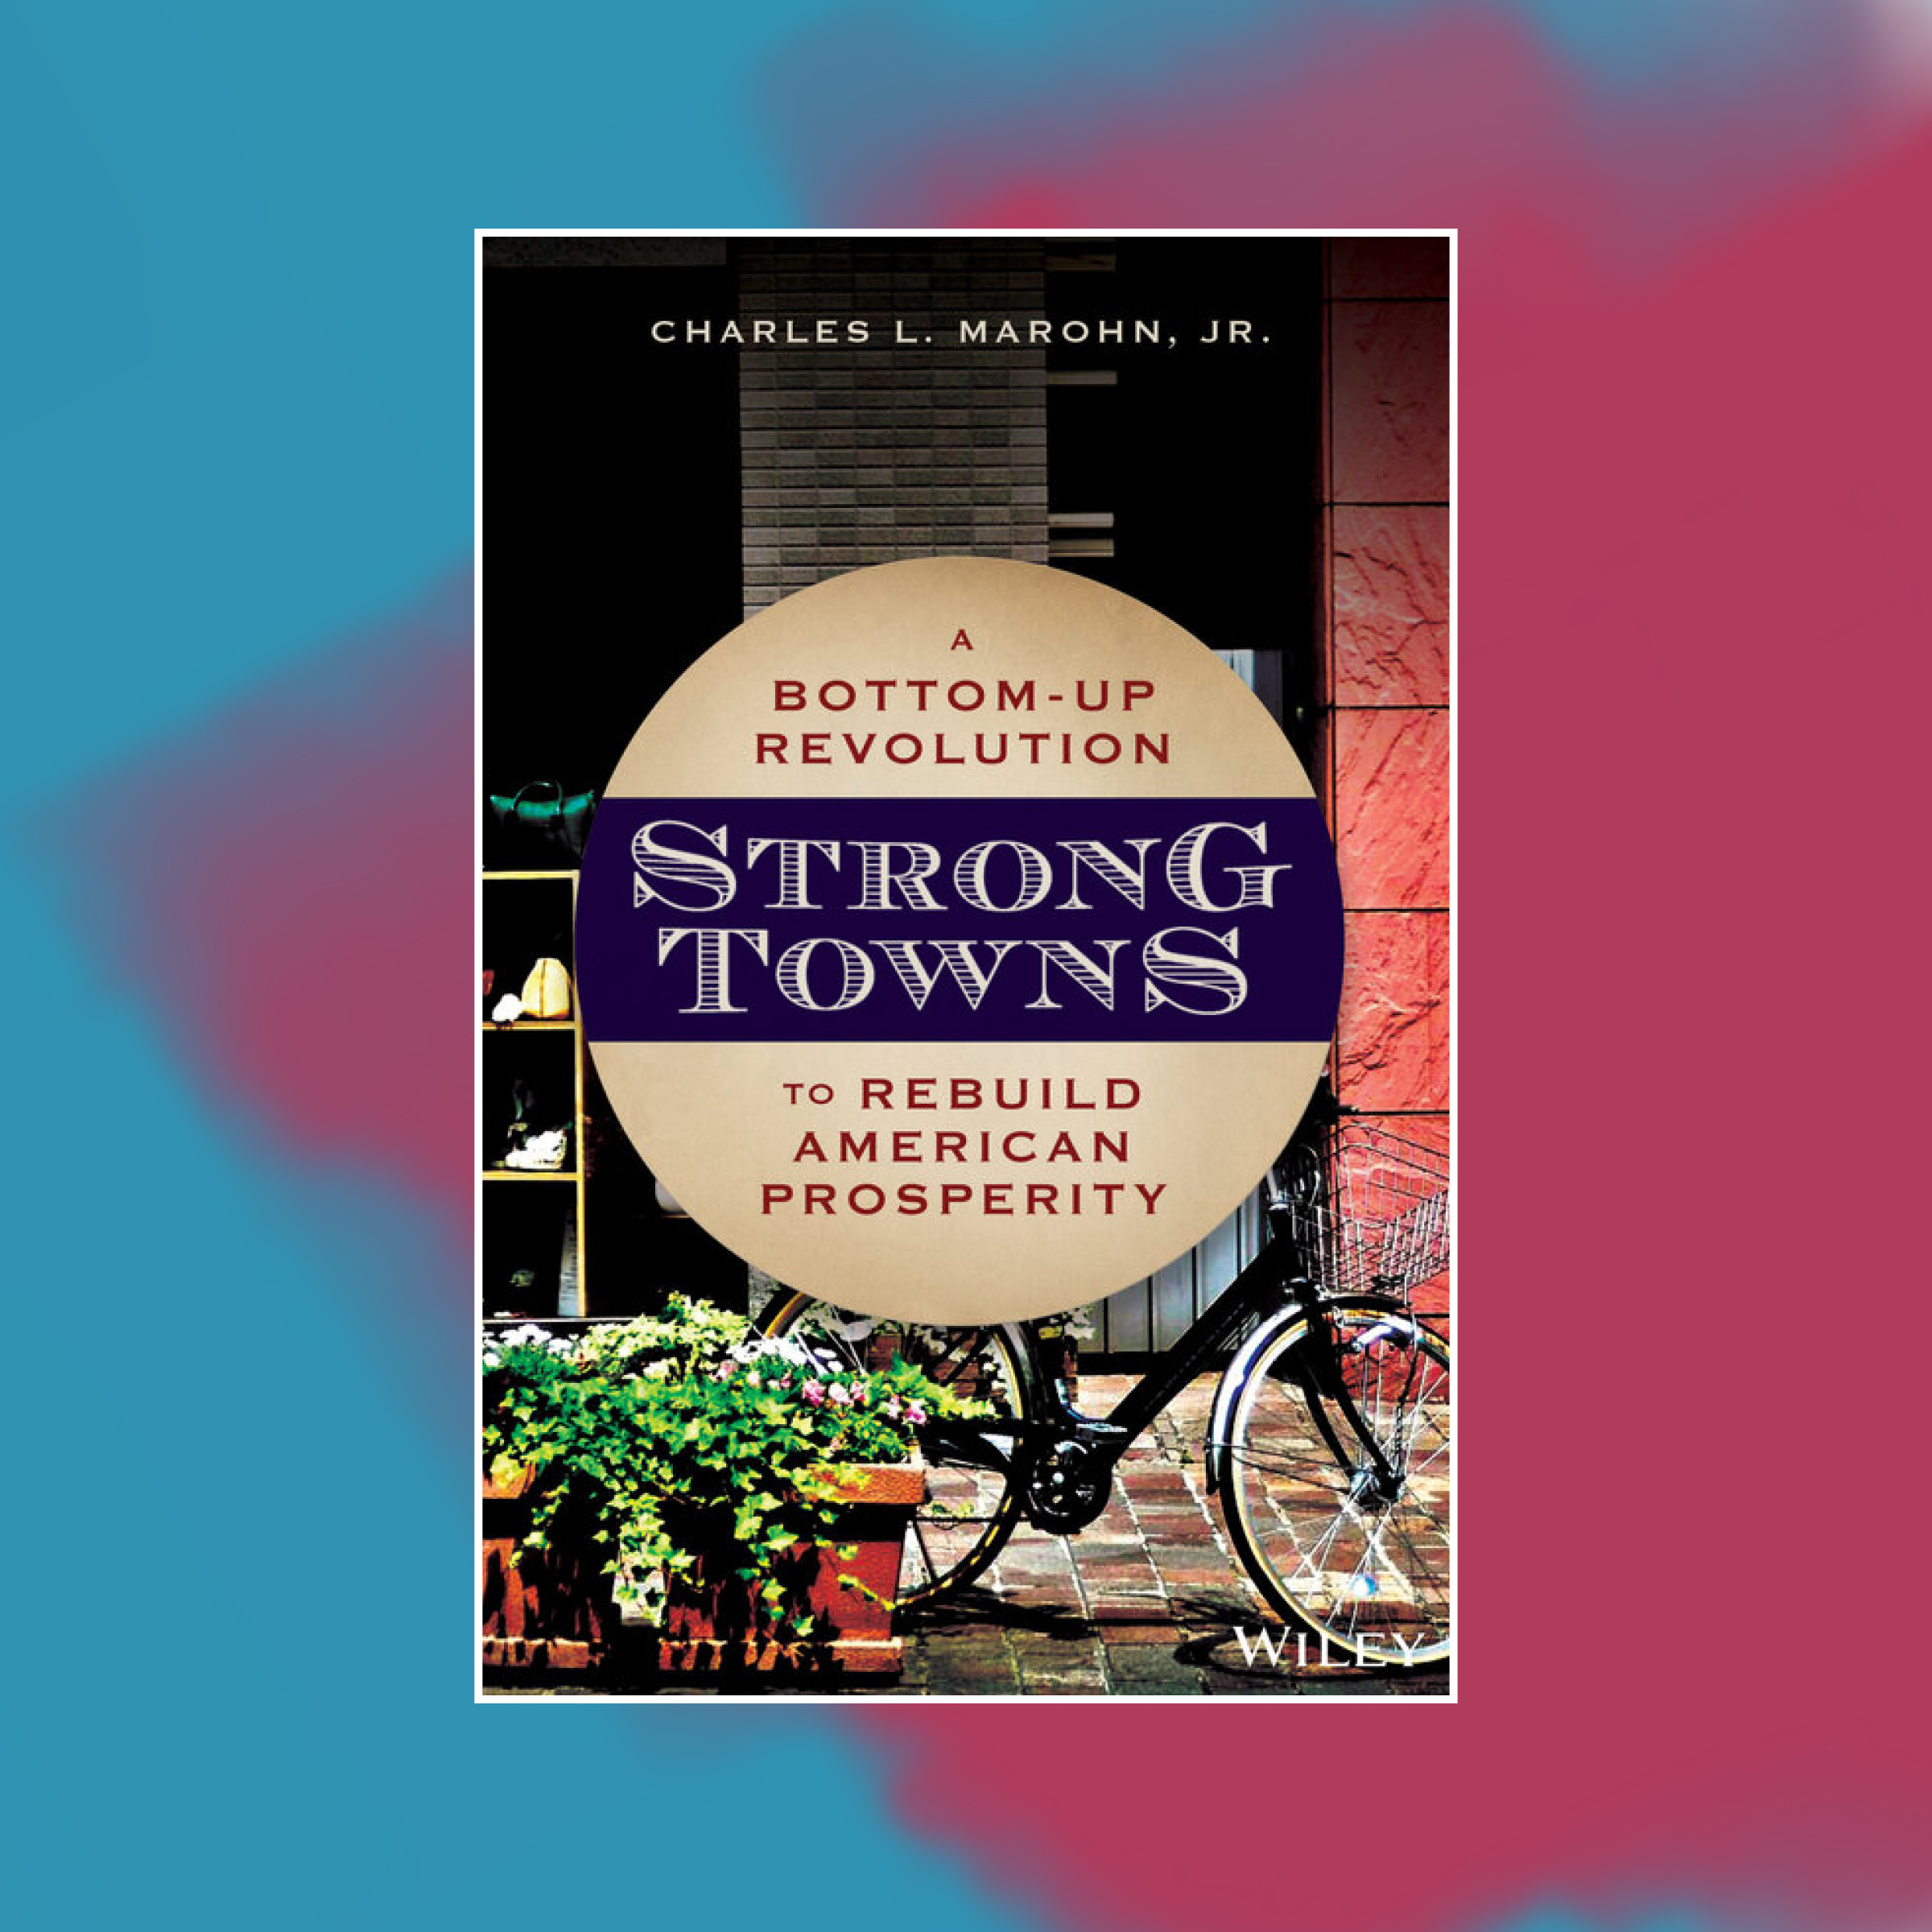 Book cover of Strong Towns against an abstract painted background